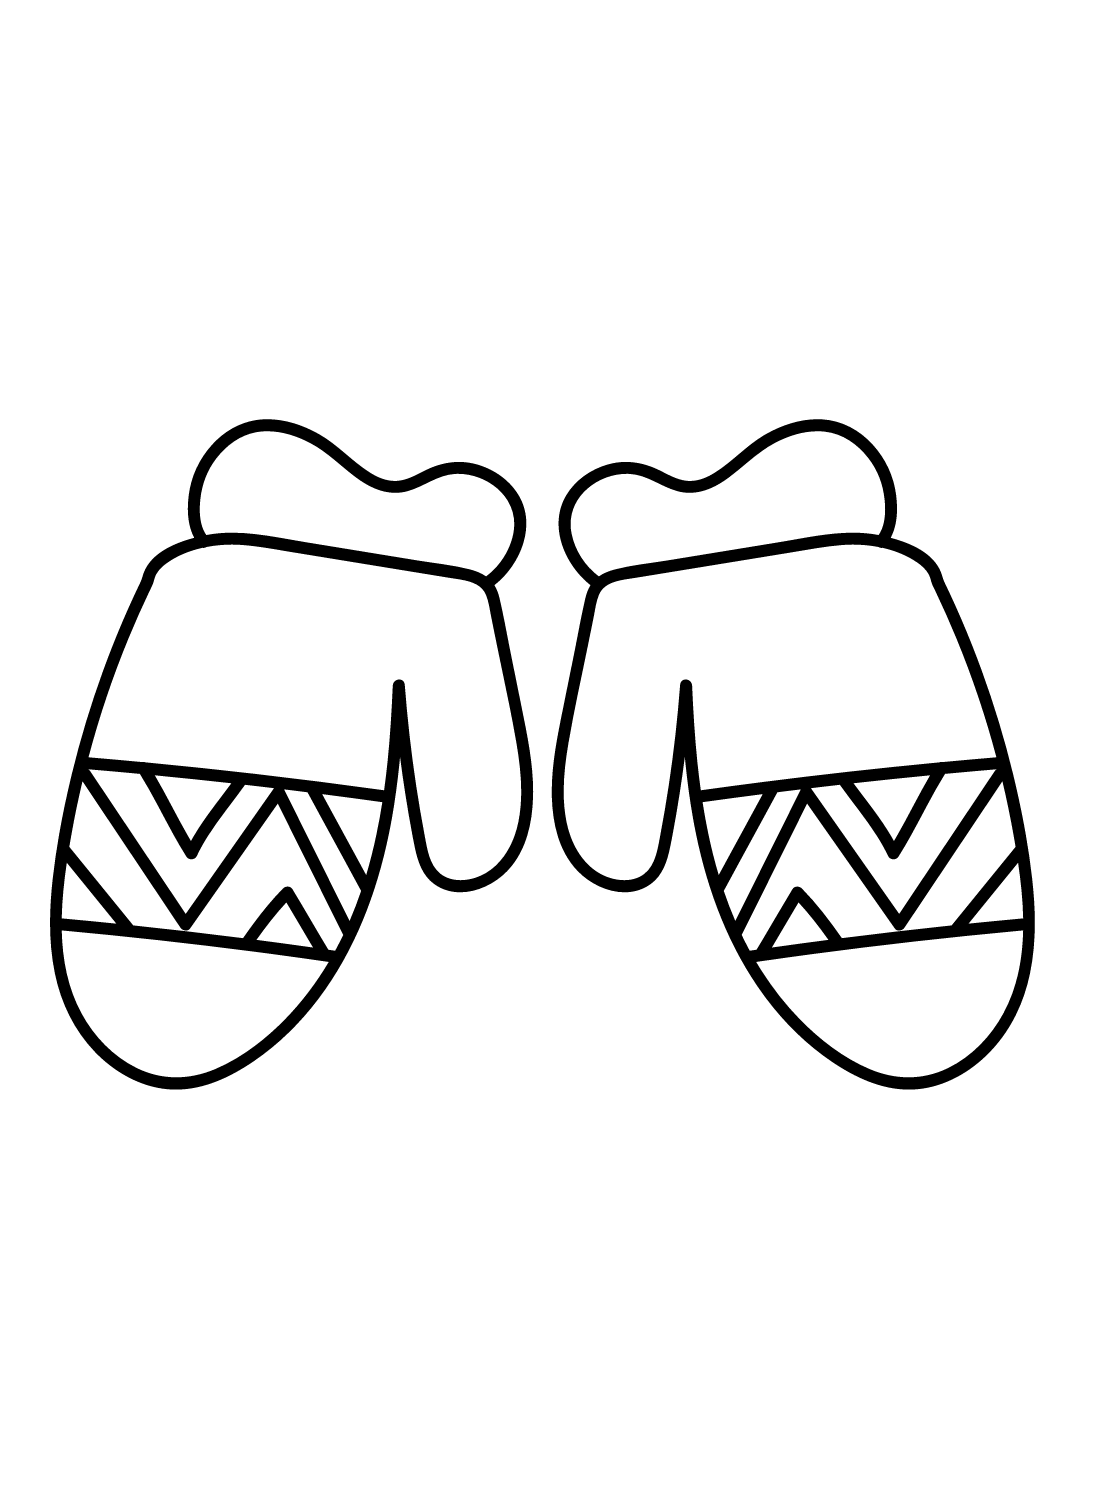 Printable Mittens Pictures Coloring Page